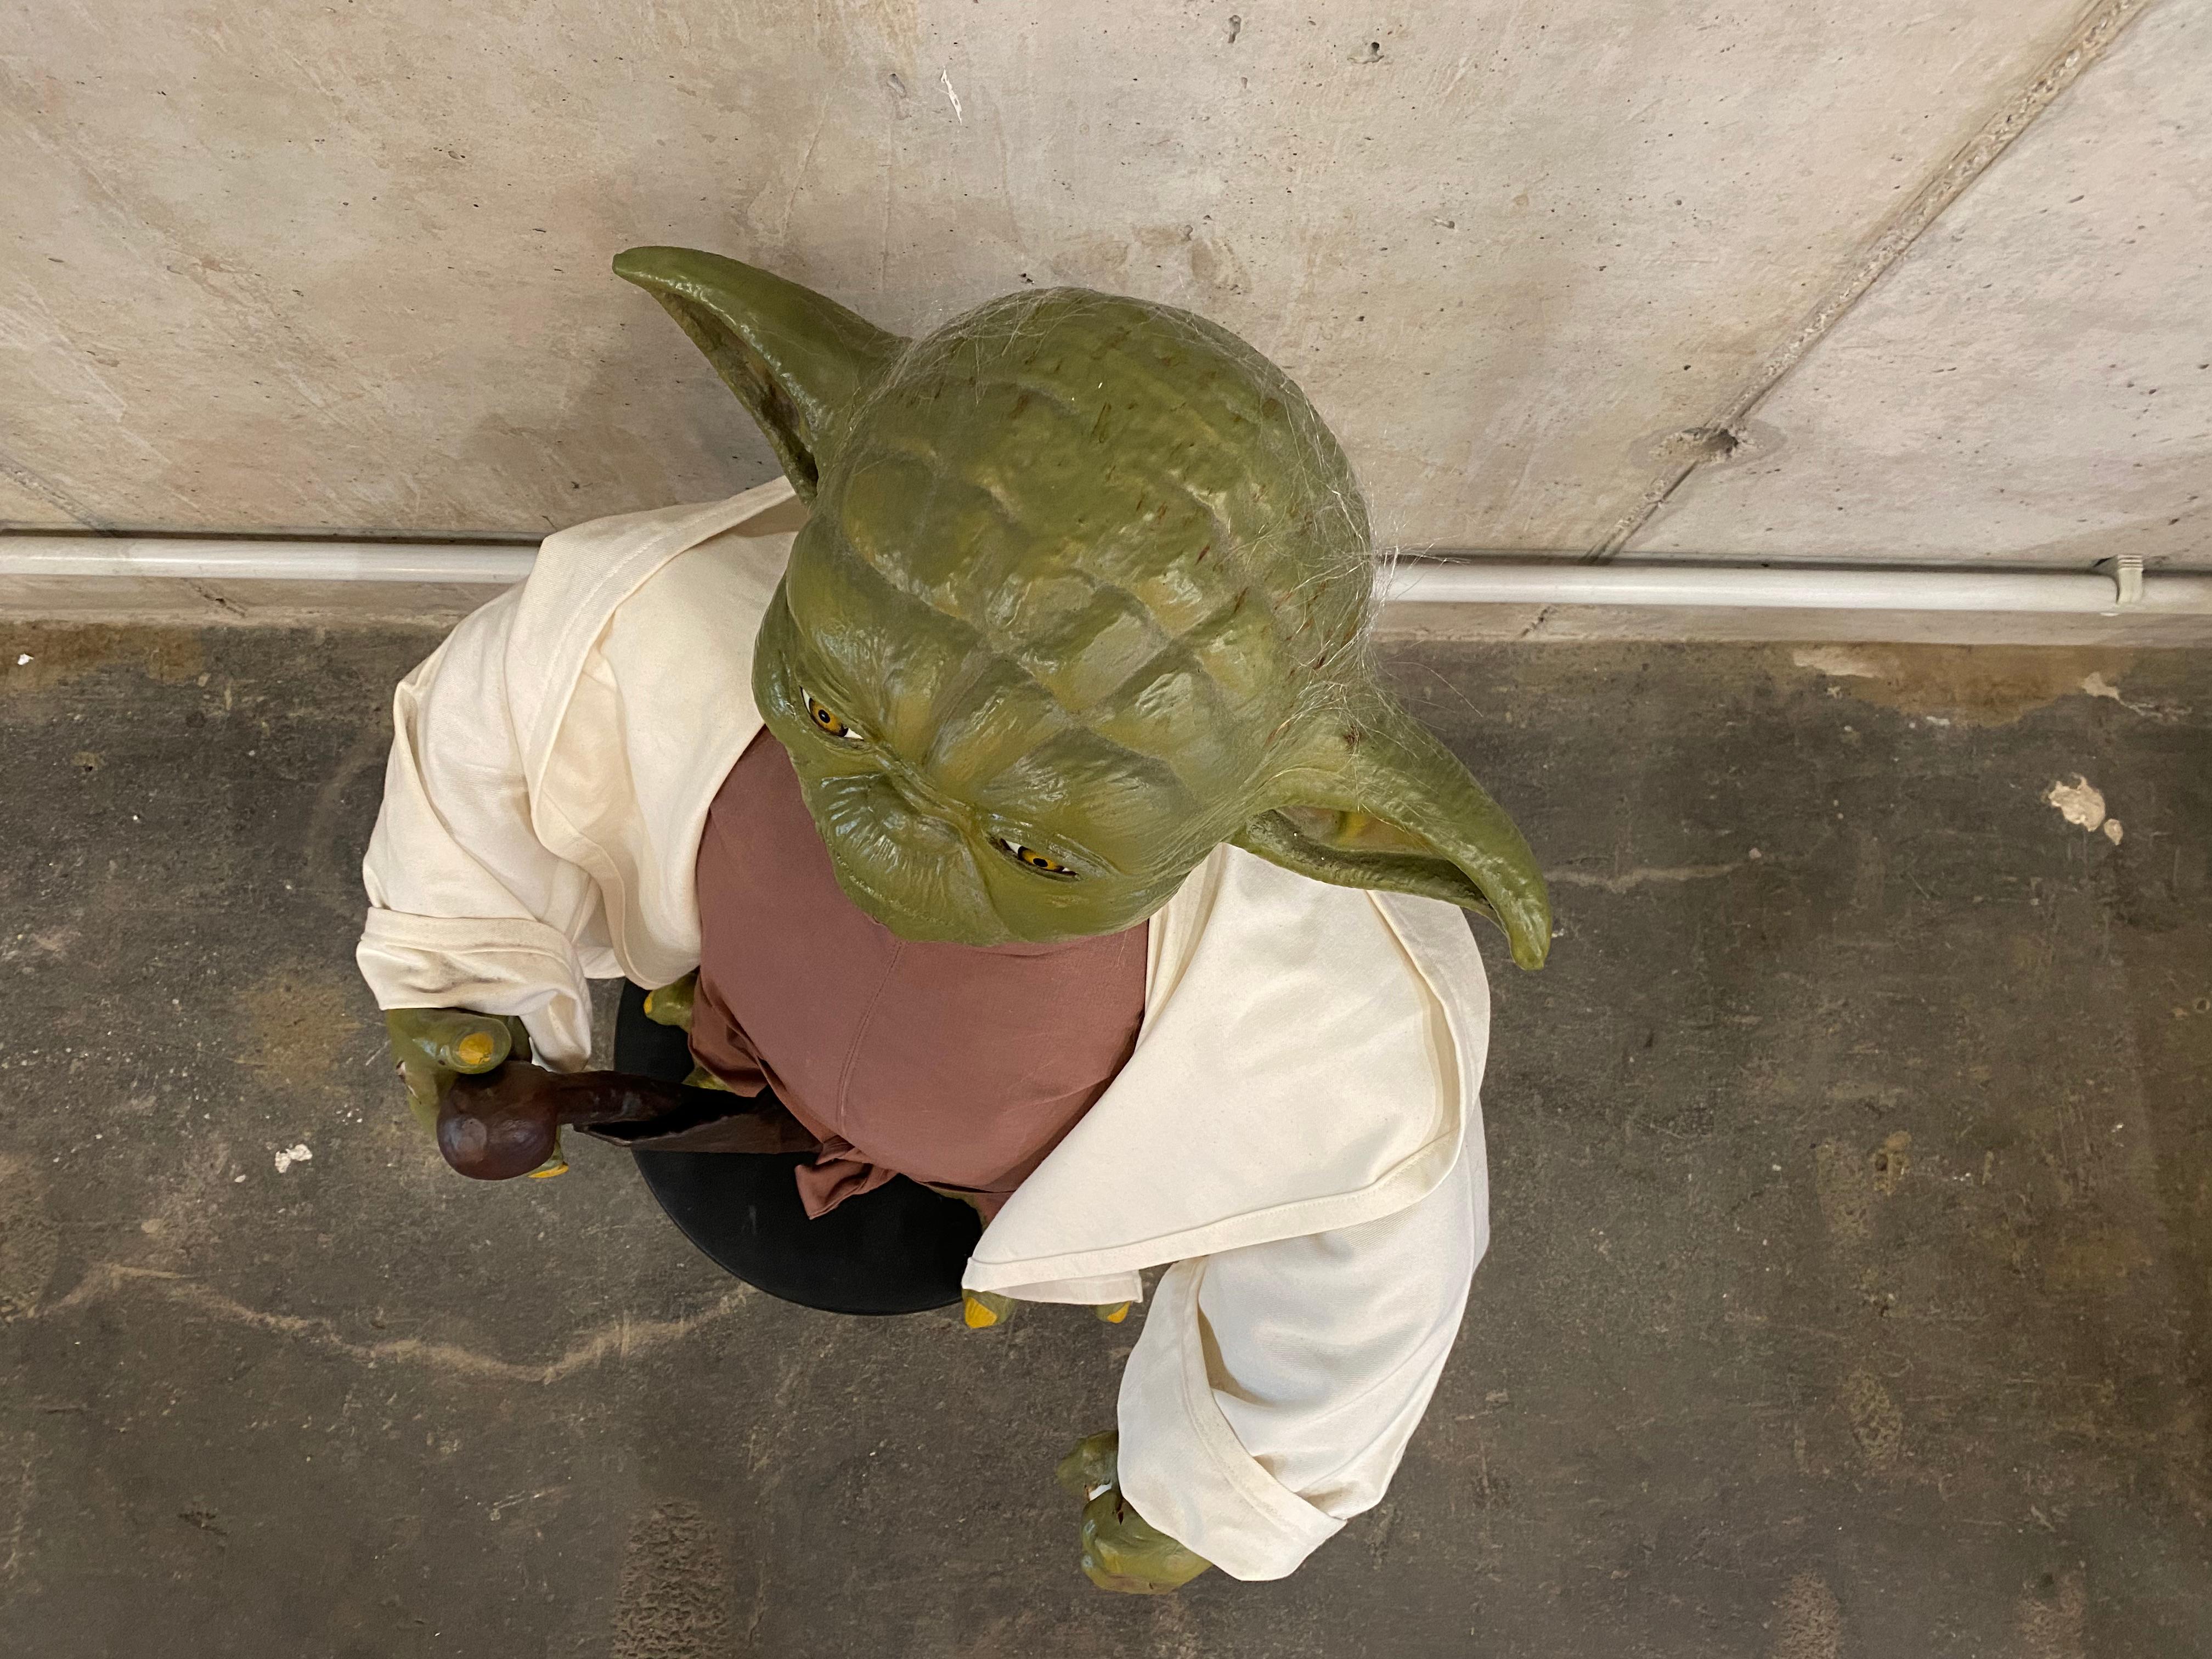 Life Size Yoda Figure, Edition of 50, Could Be Star Wars Photo Requisite For Sale 1